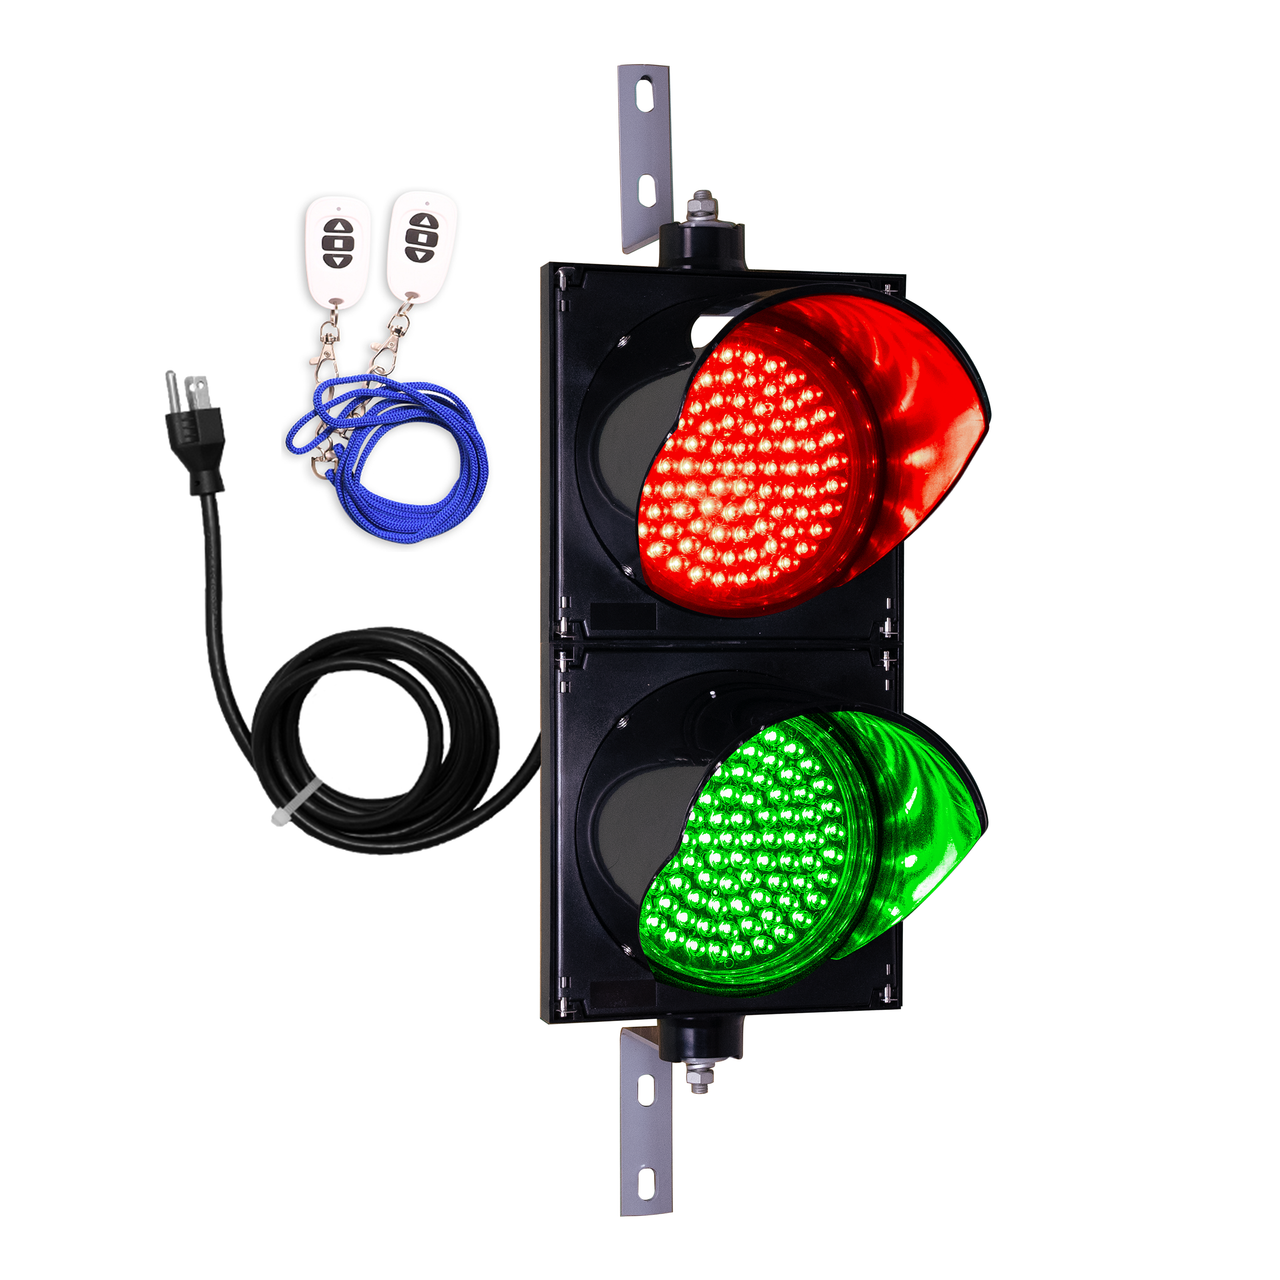 8 Inch Diameter Lens LED Stop & Go Loading Dock Traffic Light- 2 Color,  RED/GREEN, Wireless Keyfob and 8 Foot Power Cord (Plug And Play)